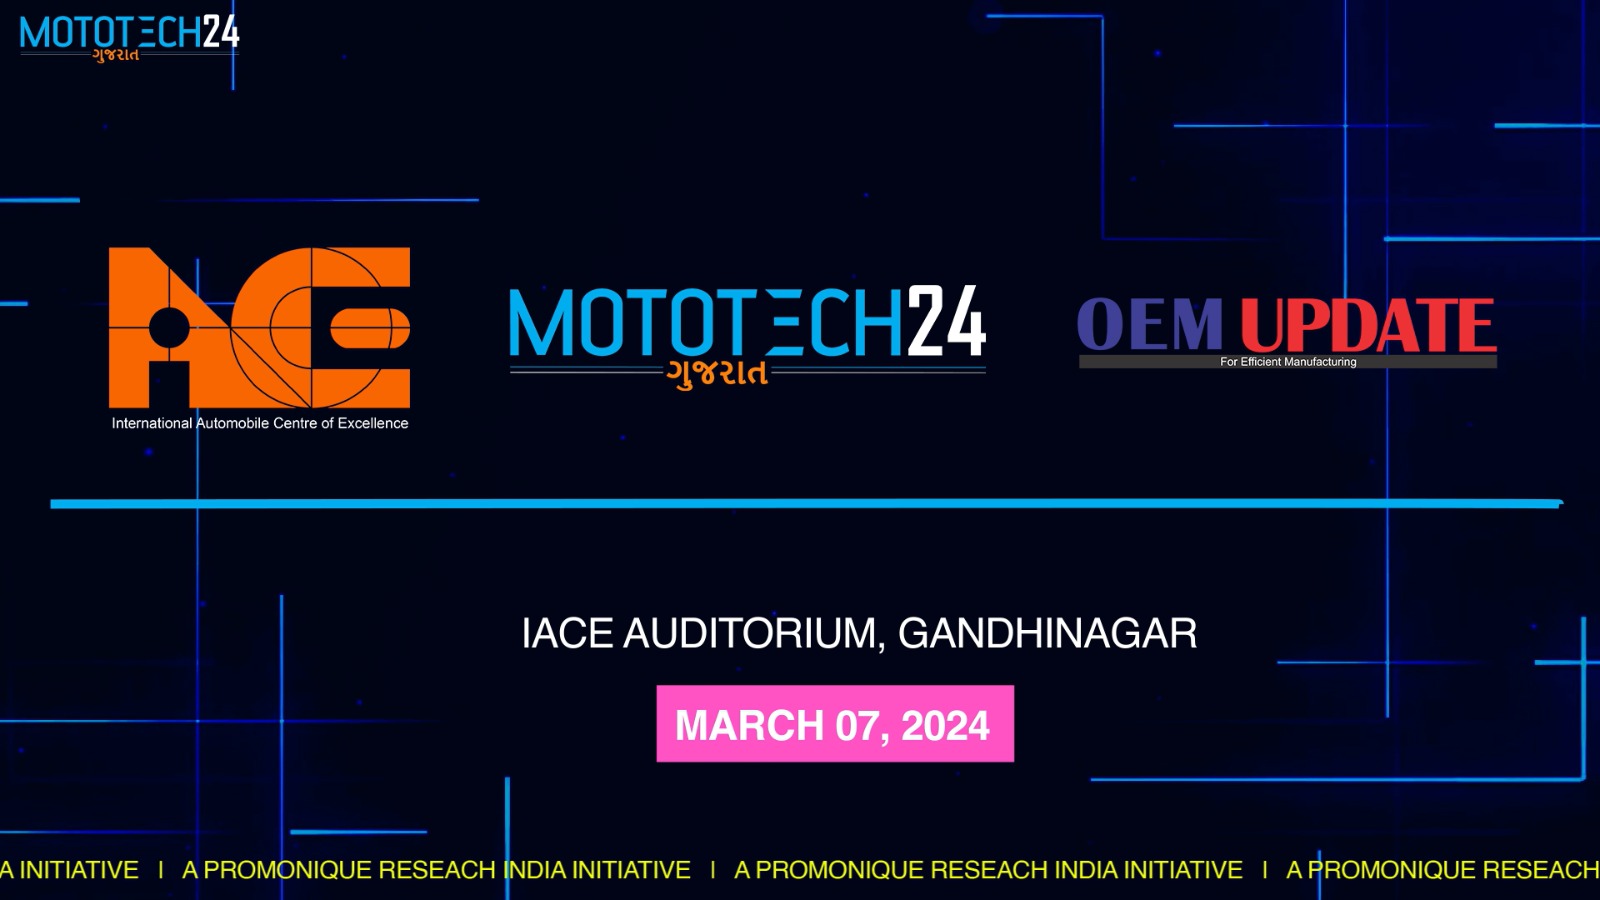 Our renowned speakers for International Automobile Centre of Excellence Mototech India